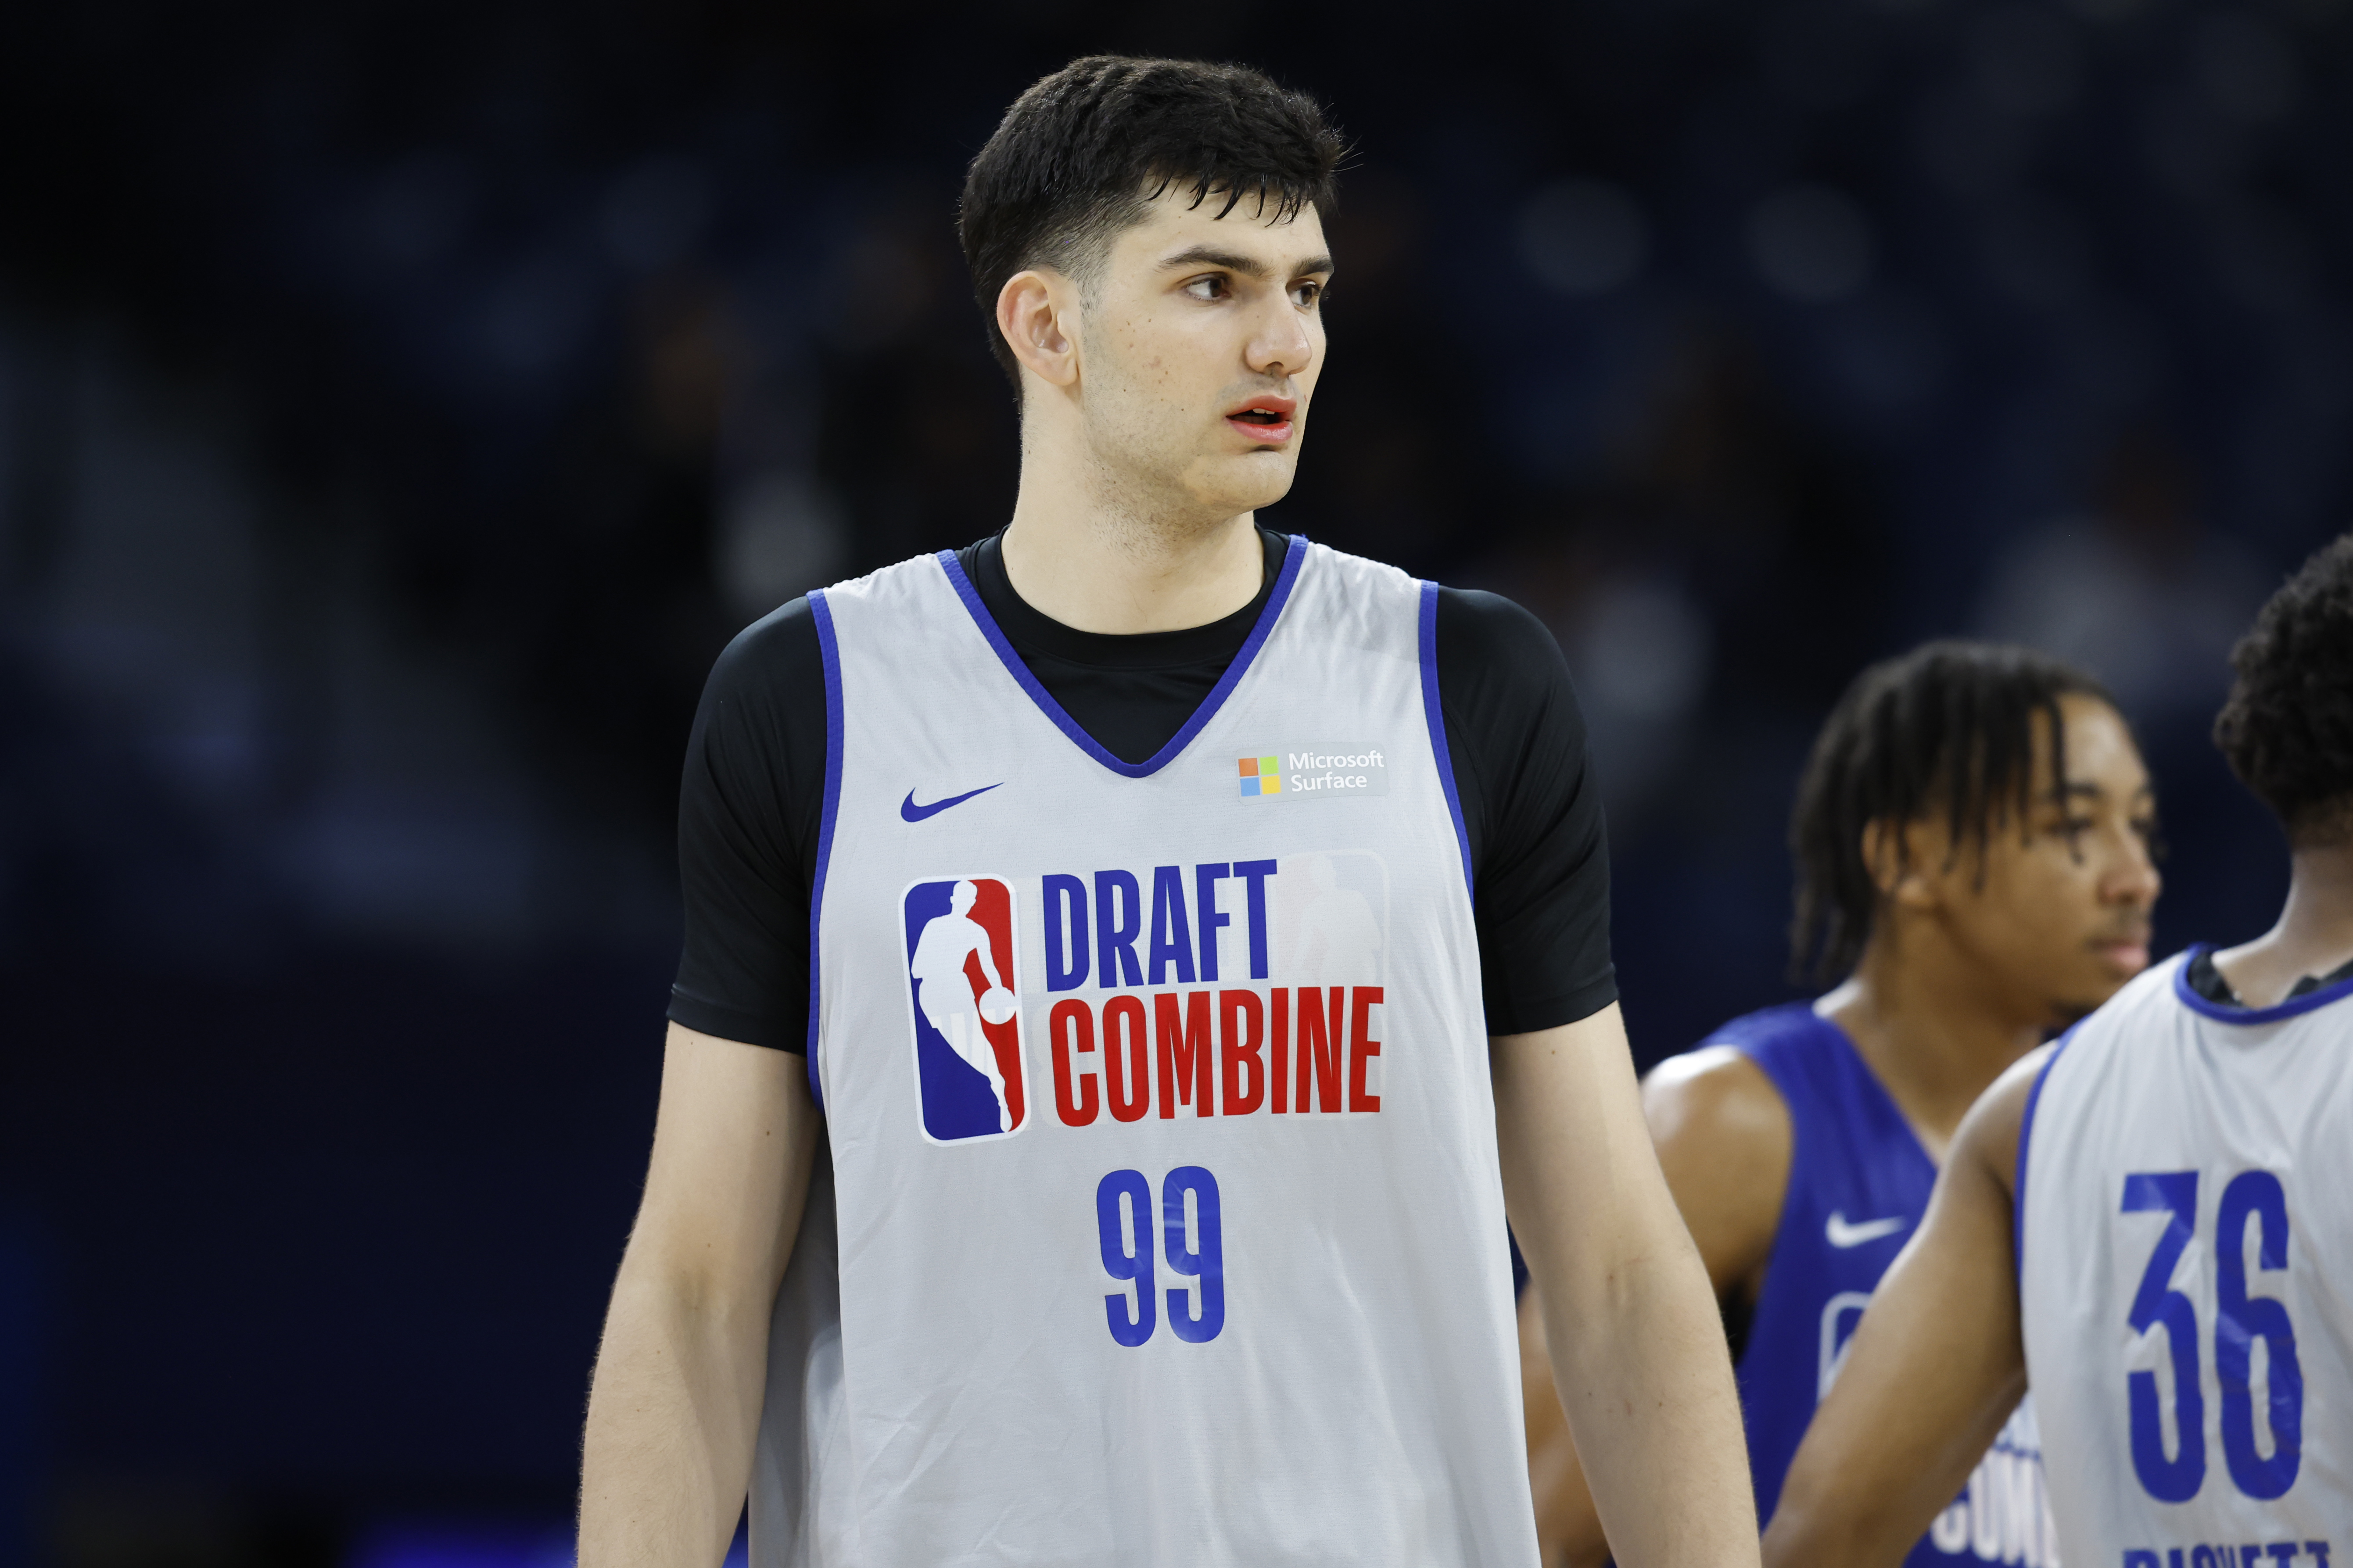 Tristan Vukcevic #99 looks on during the 2023 NBA Combine at Wintrust Arena on May 17, 2023 in Chicago, Illinois. NOTE TO USER: User expressly acknowledges and agrees that, by downloading and or using this photograph, user is consenting to the terms and conditions of the Getty Images License Agreement. Mandatory Copyright Notice: Copyright 2023 NBAE